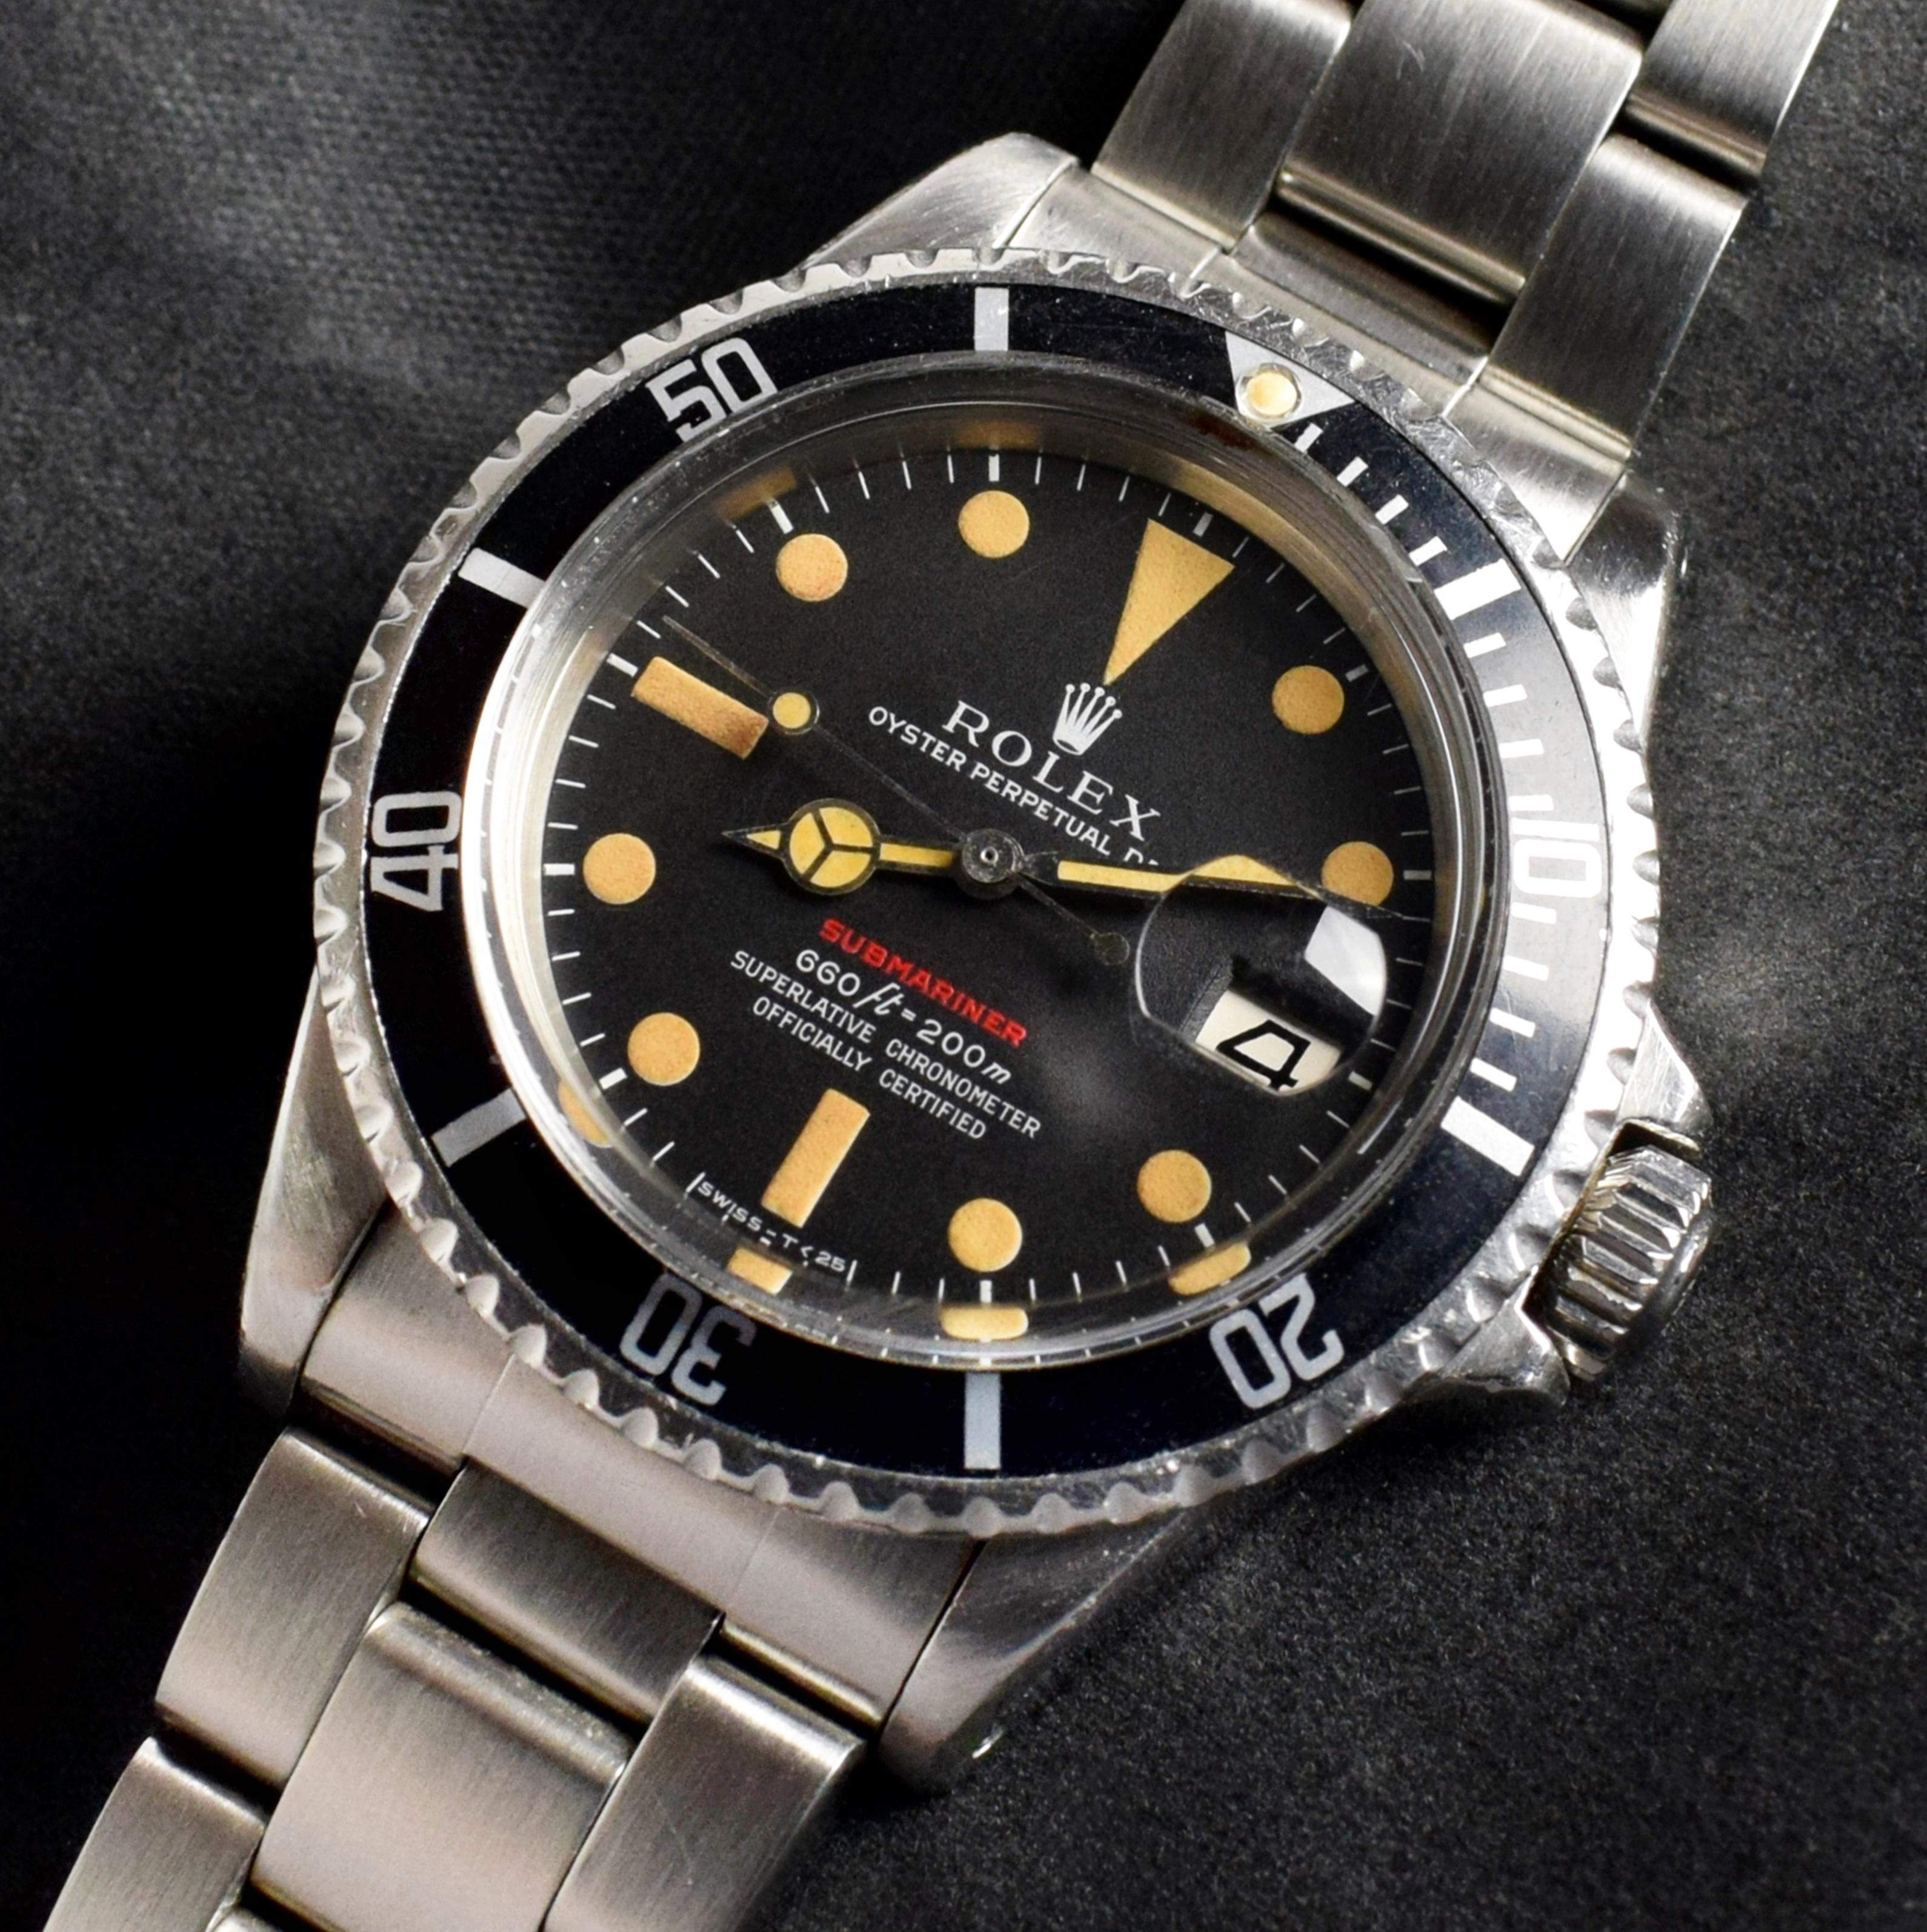 Brand: Vintage Rolex
Model: 1680
Year: 1970
Serial number: 26xxxxx
Reference: OT1506
Case: Show heavy sign of wear with some polishing from previous; inner case back stamped 1680 IV.70
Dial: Excellent Aged Condition Tritium Dial where the lumes have